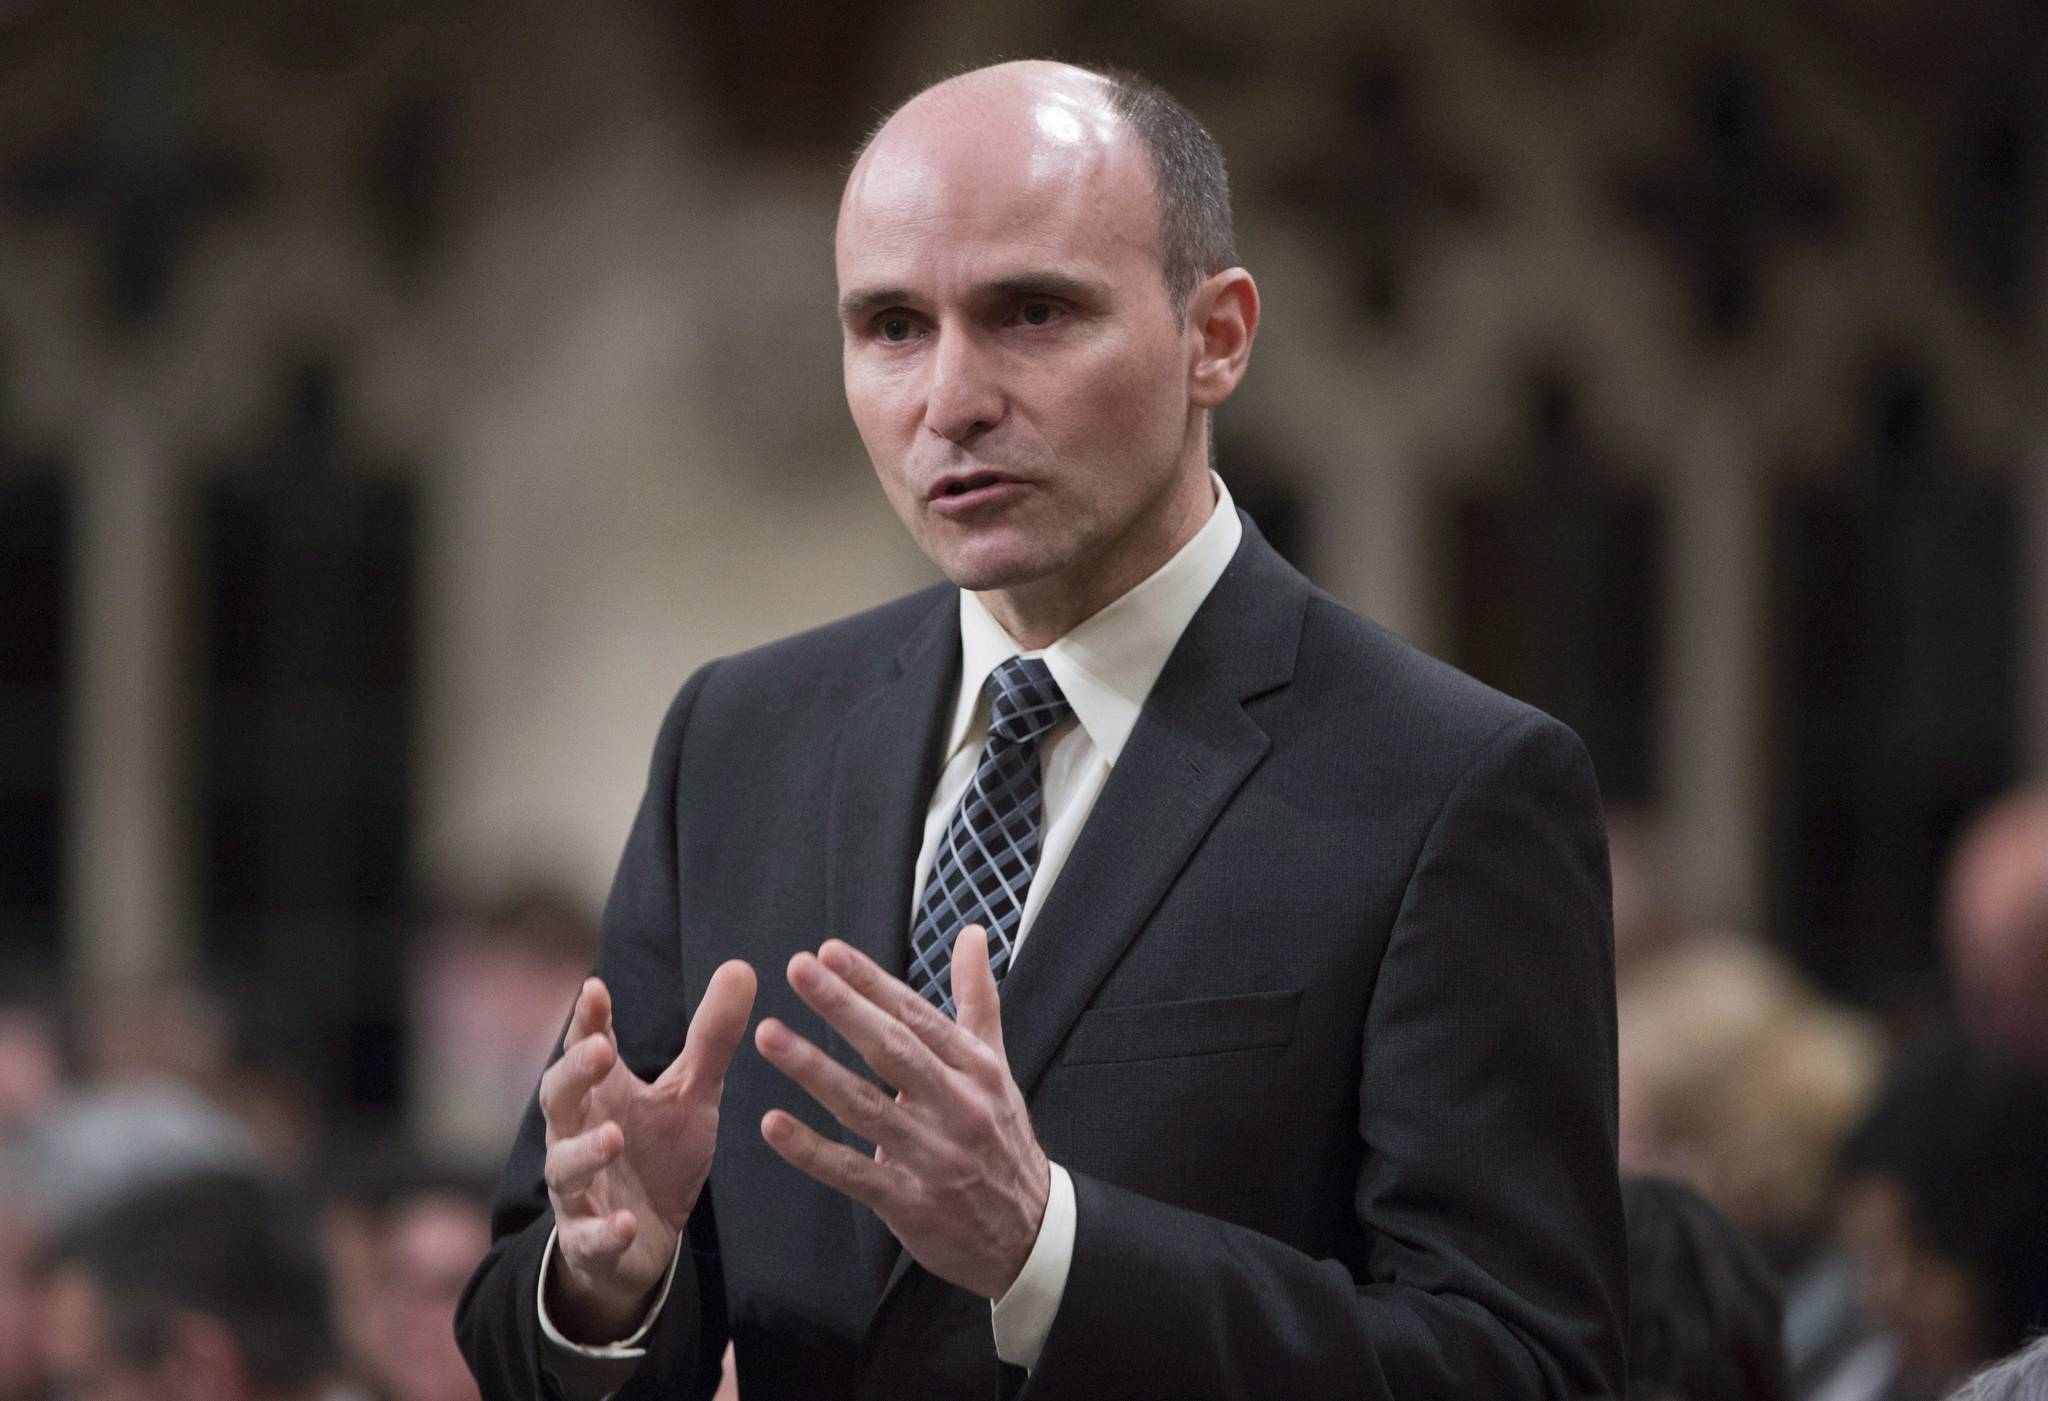 Families Minister Jean-Yves Duclos defended Service Canada’s decision to ask its employees to adopt gender-neutral language when interacting with the public, as members of the opposition mocked the policy mercilessly. THE CANADIAN PRESS/Adrian Wyld